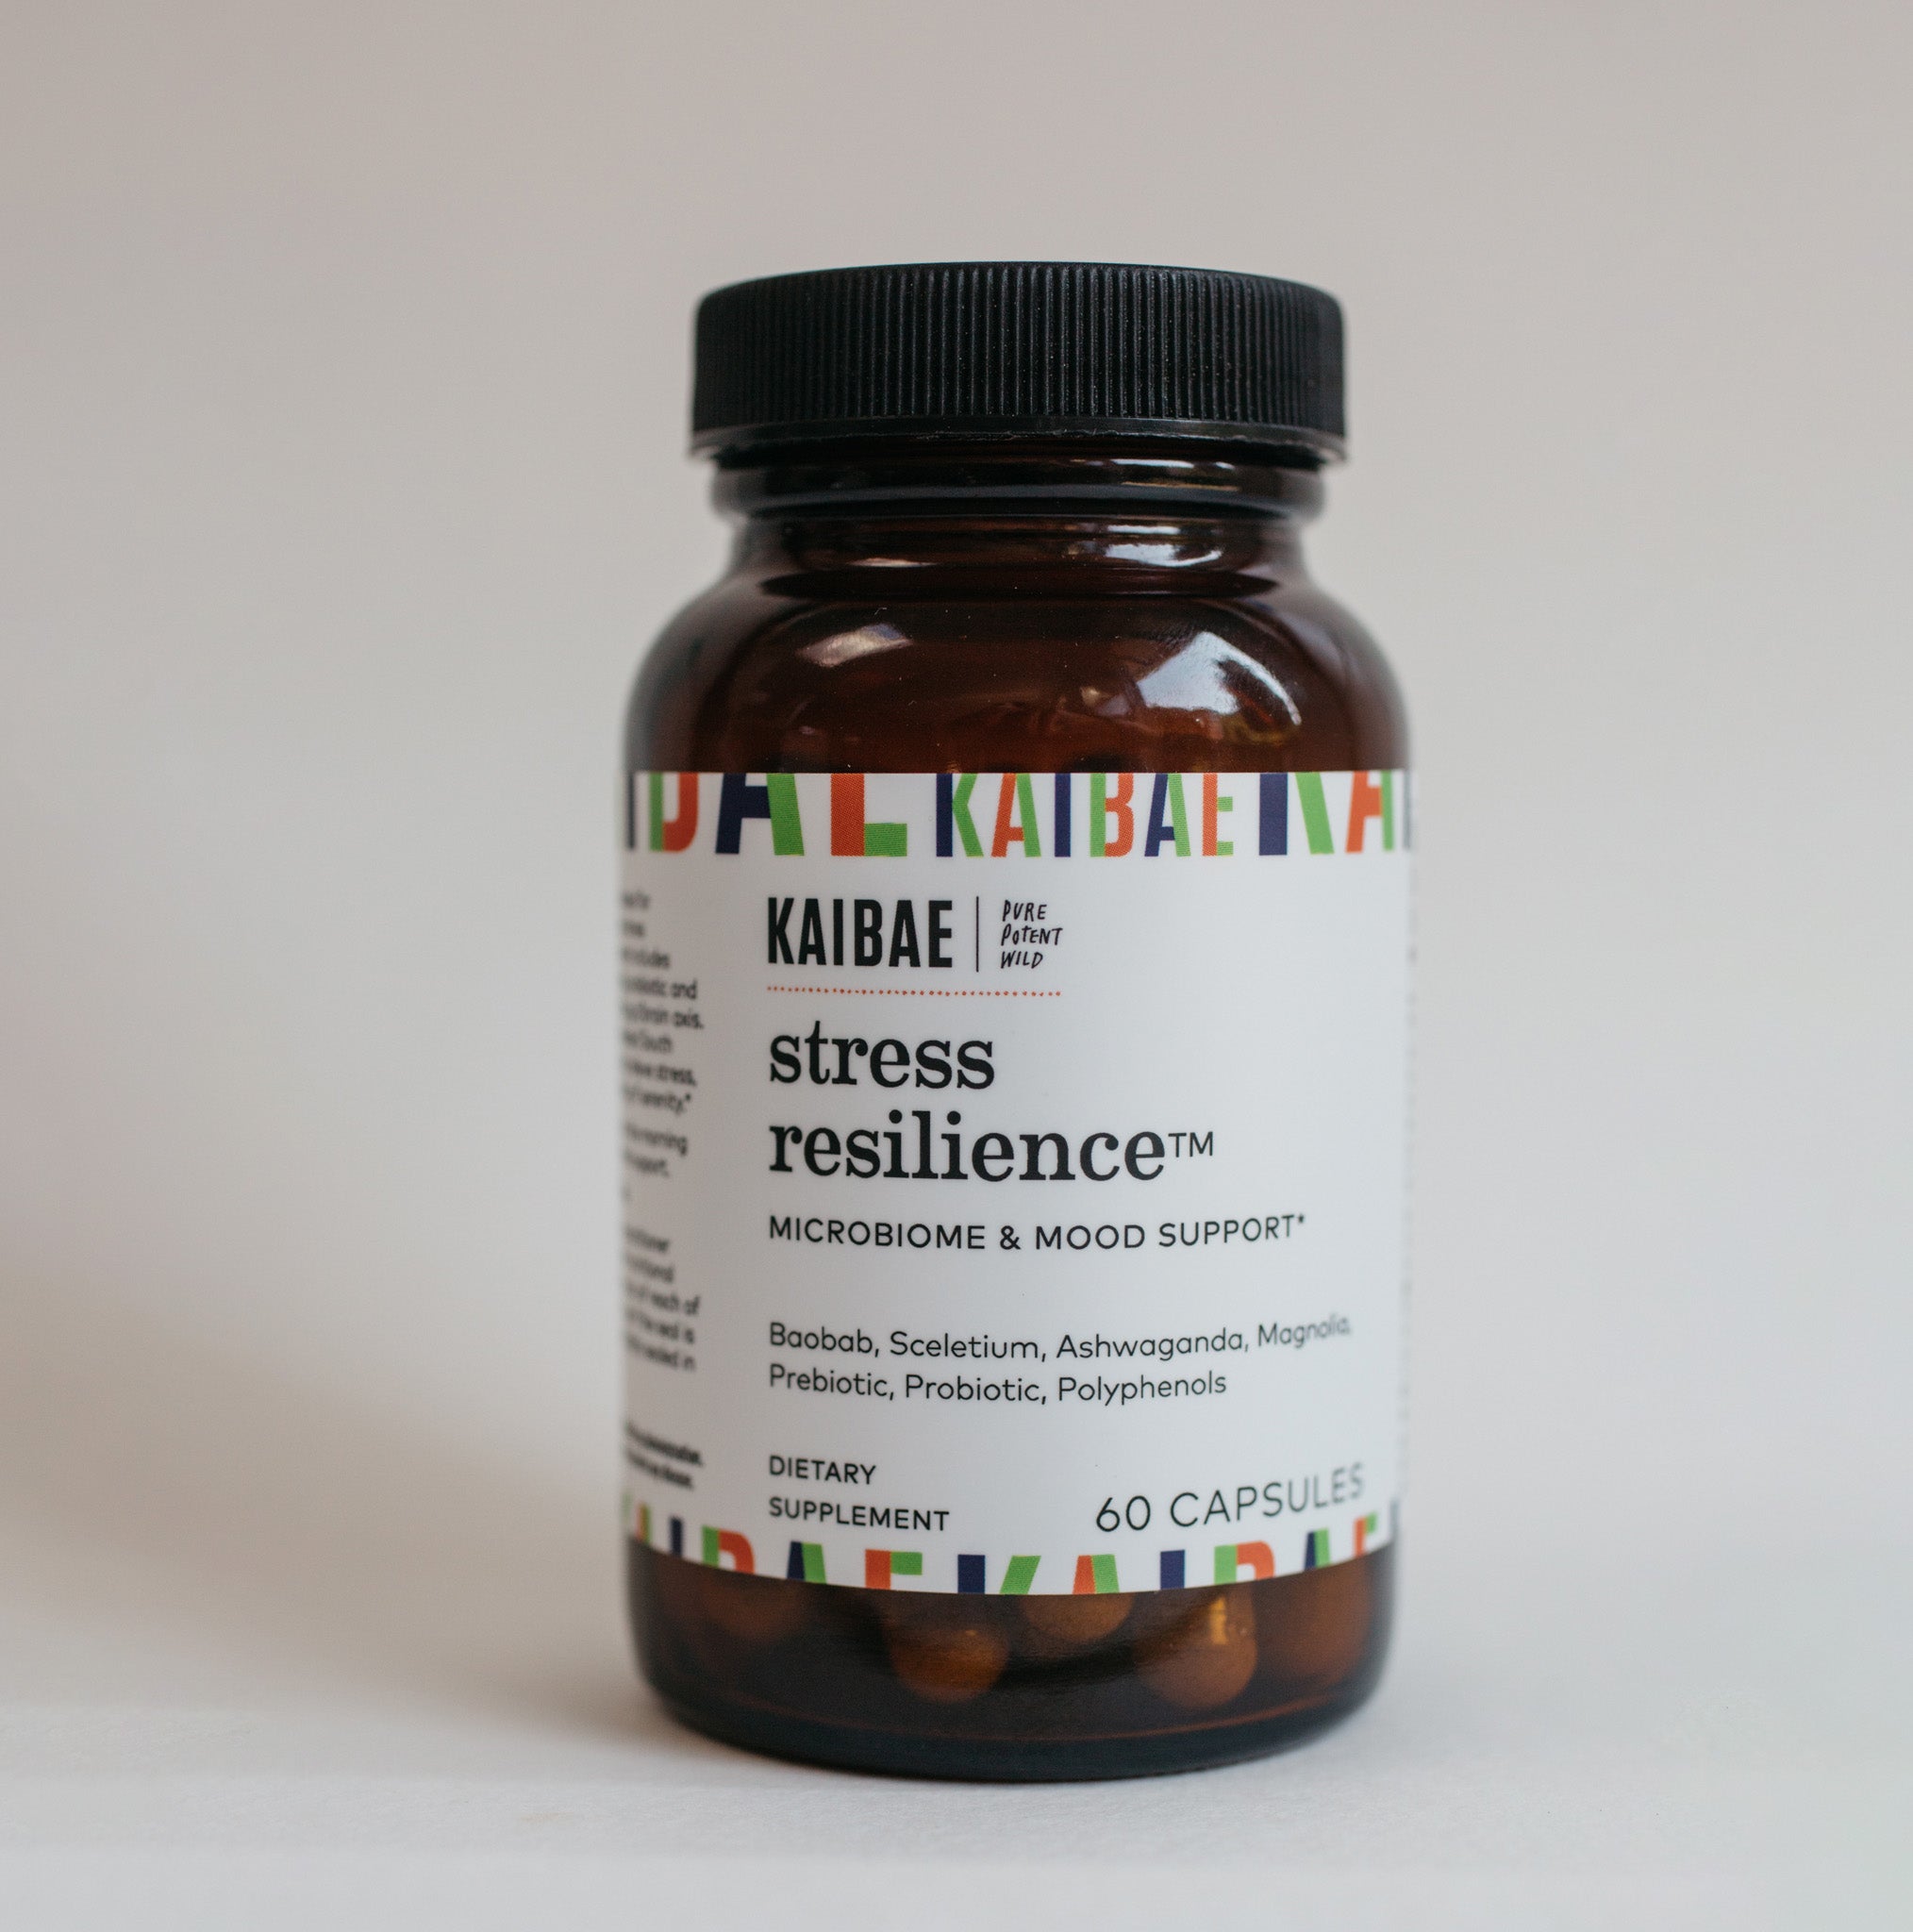 A close-up image of a supplement bottle labeled "KAIBAE stress resilience, for microbiome & mood support" with dietary contents  Baobab, Sceletium, Ashwaganda, Magnolia, prebiotic, probiotic and polyphenols listed, against a plain, light background.